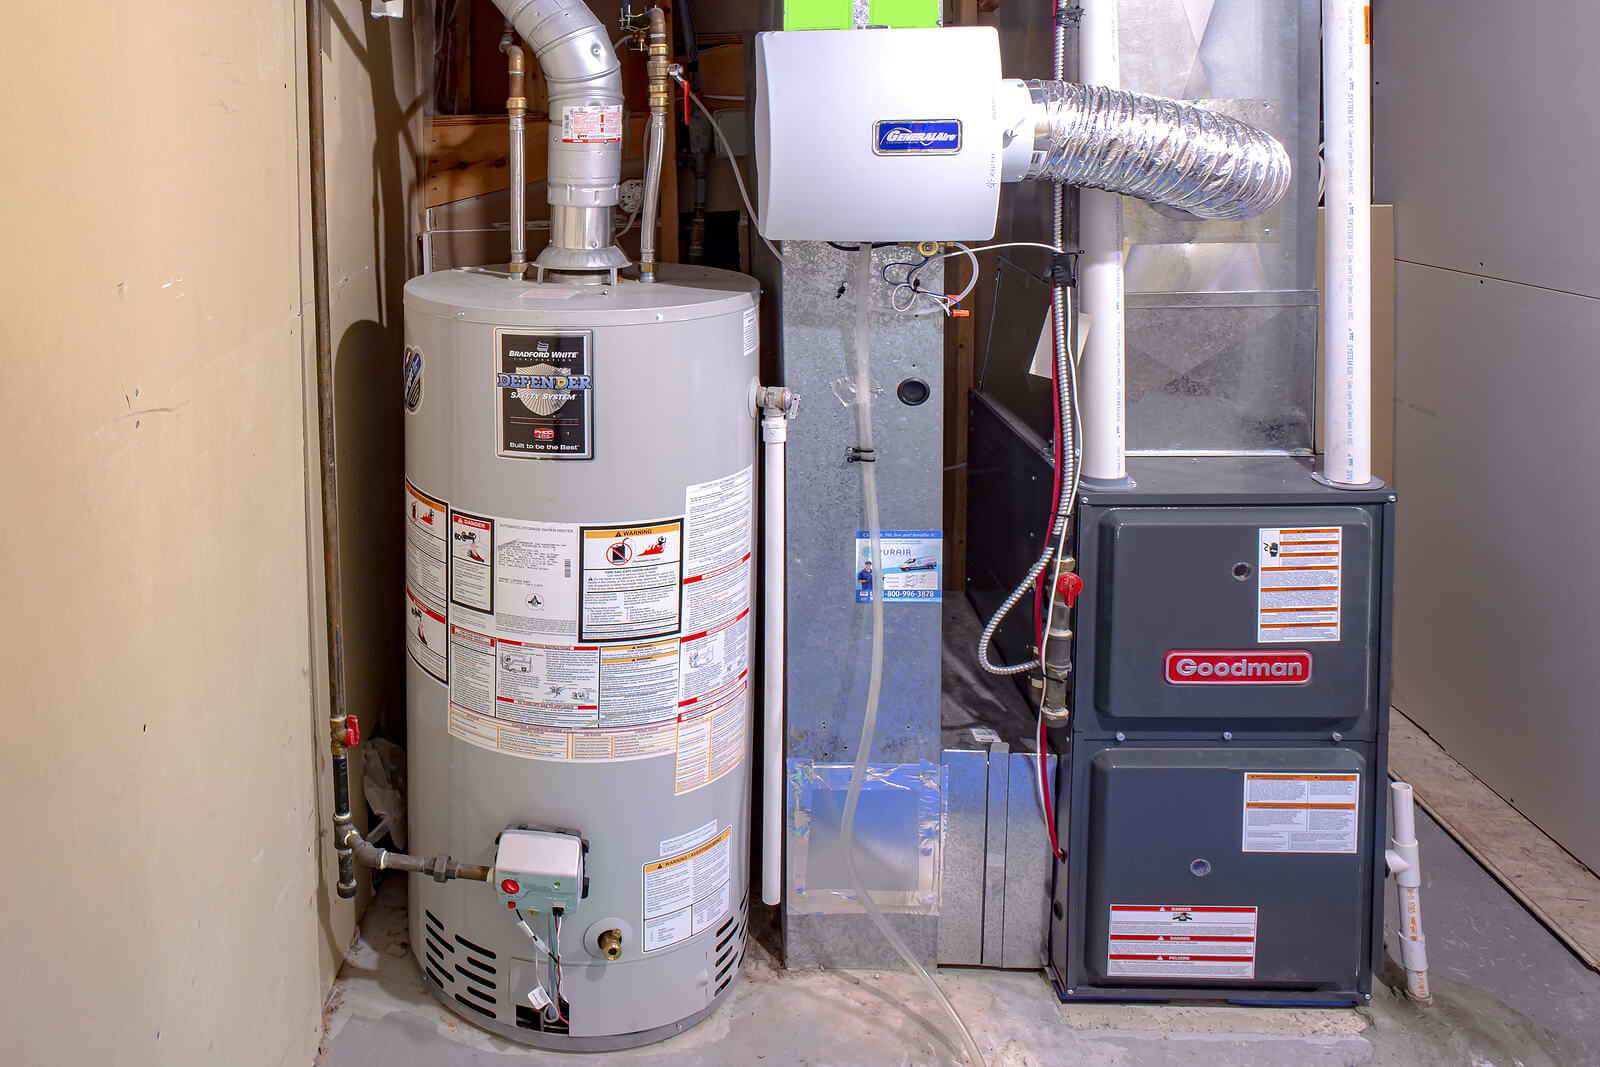 Why Use A Ventilation System For A Gas Furnace